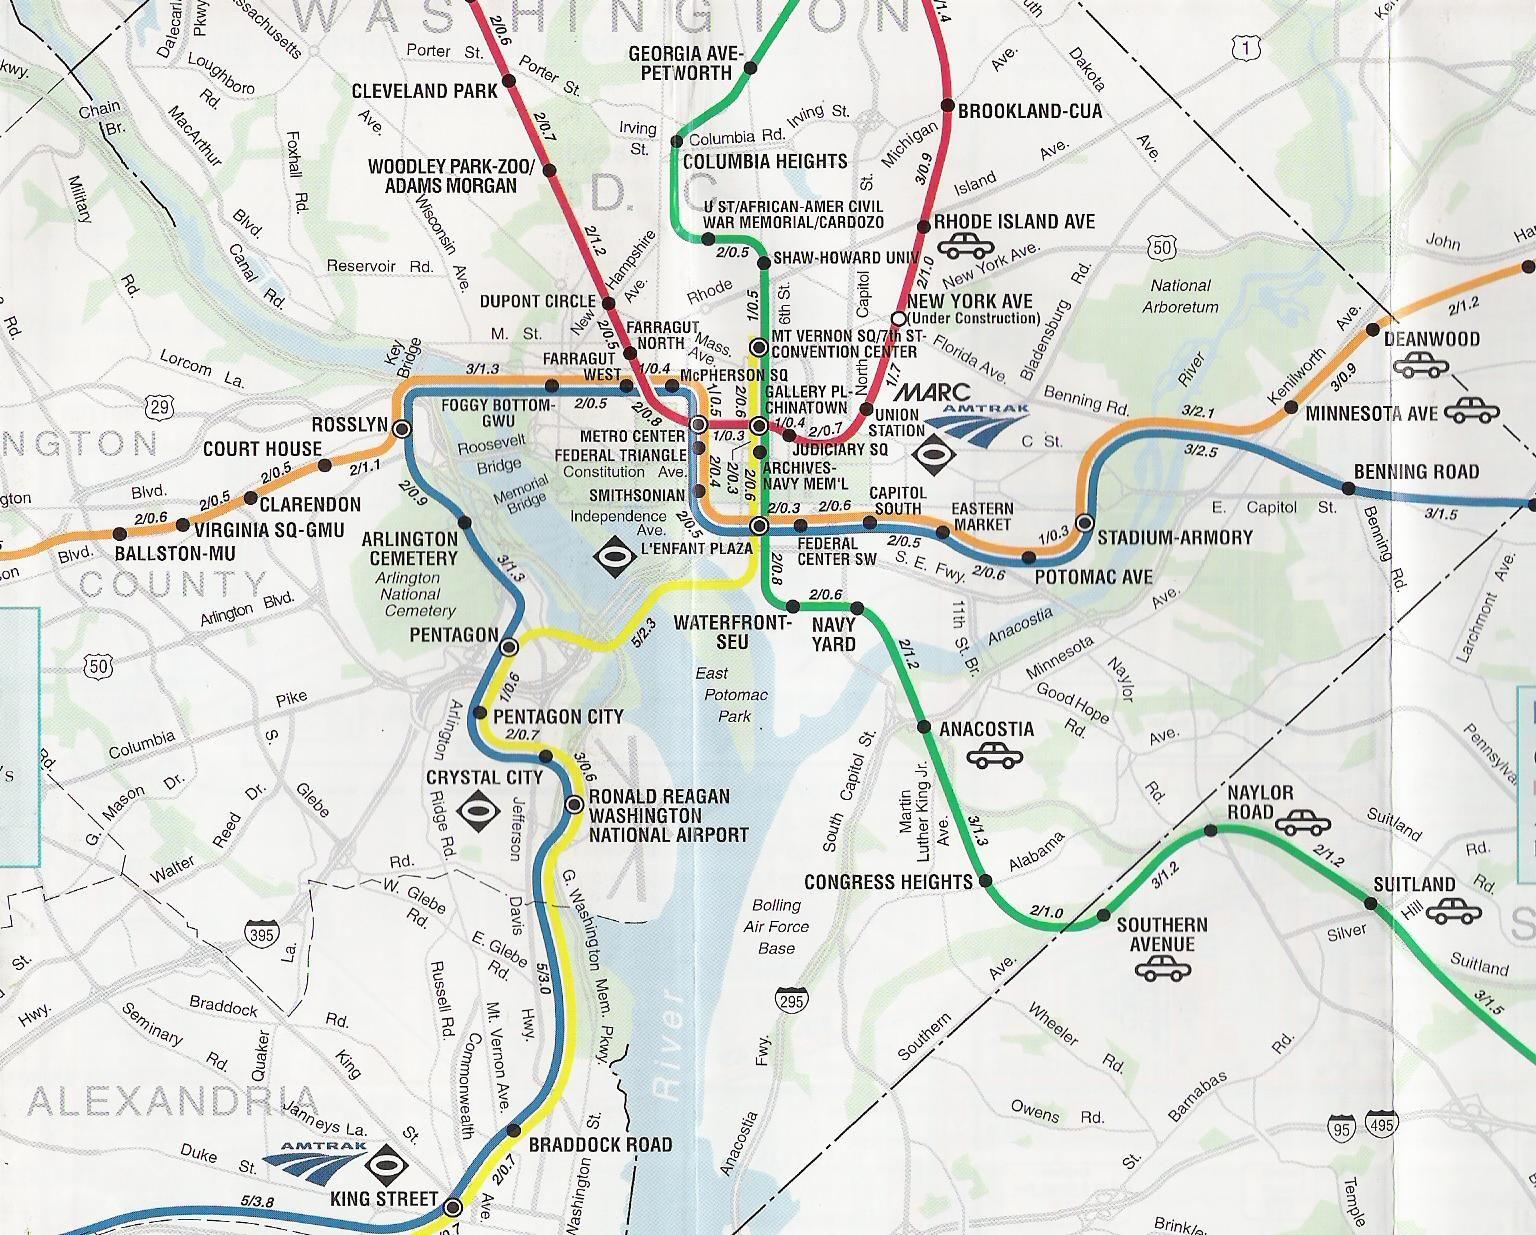 Washington Dc Map With Metro Stops Dc map with metro stops   Washington dc map with metro stops 